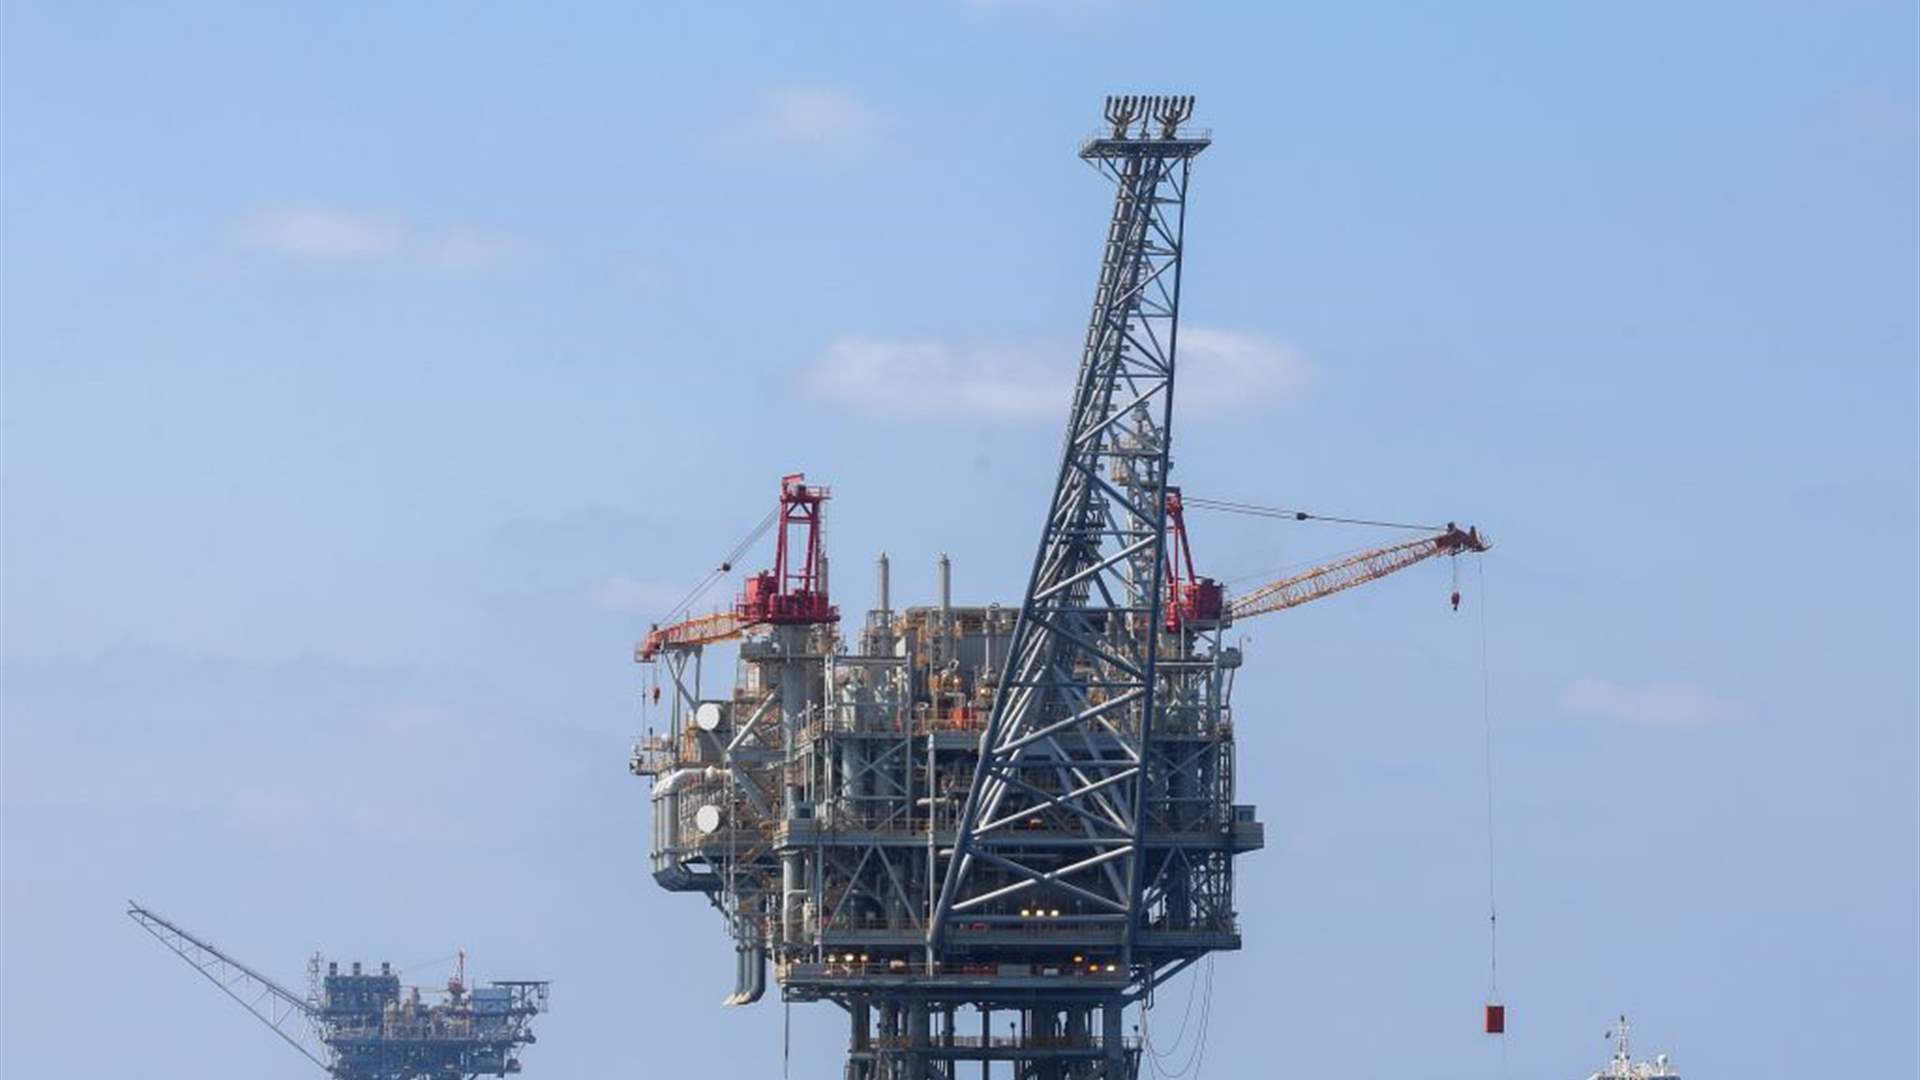 Lebanon&#39;s Bloc 9: Drilling operations set to begin with priority to local companies and employment